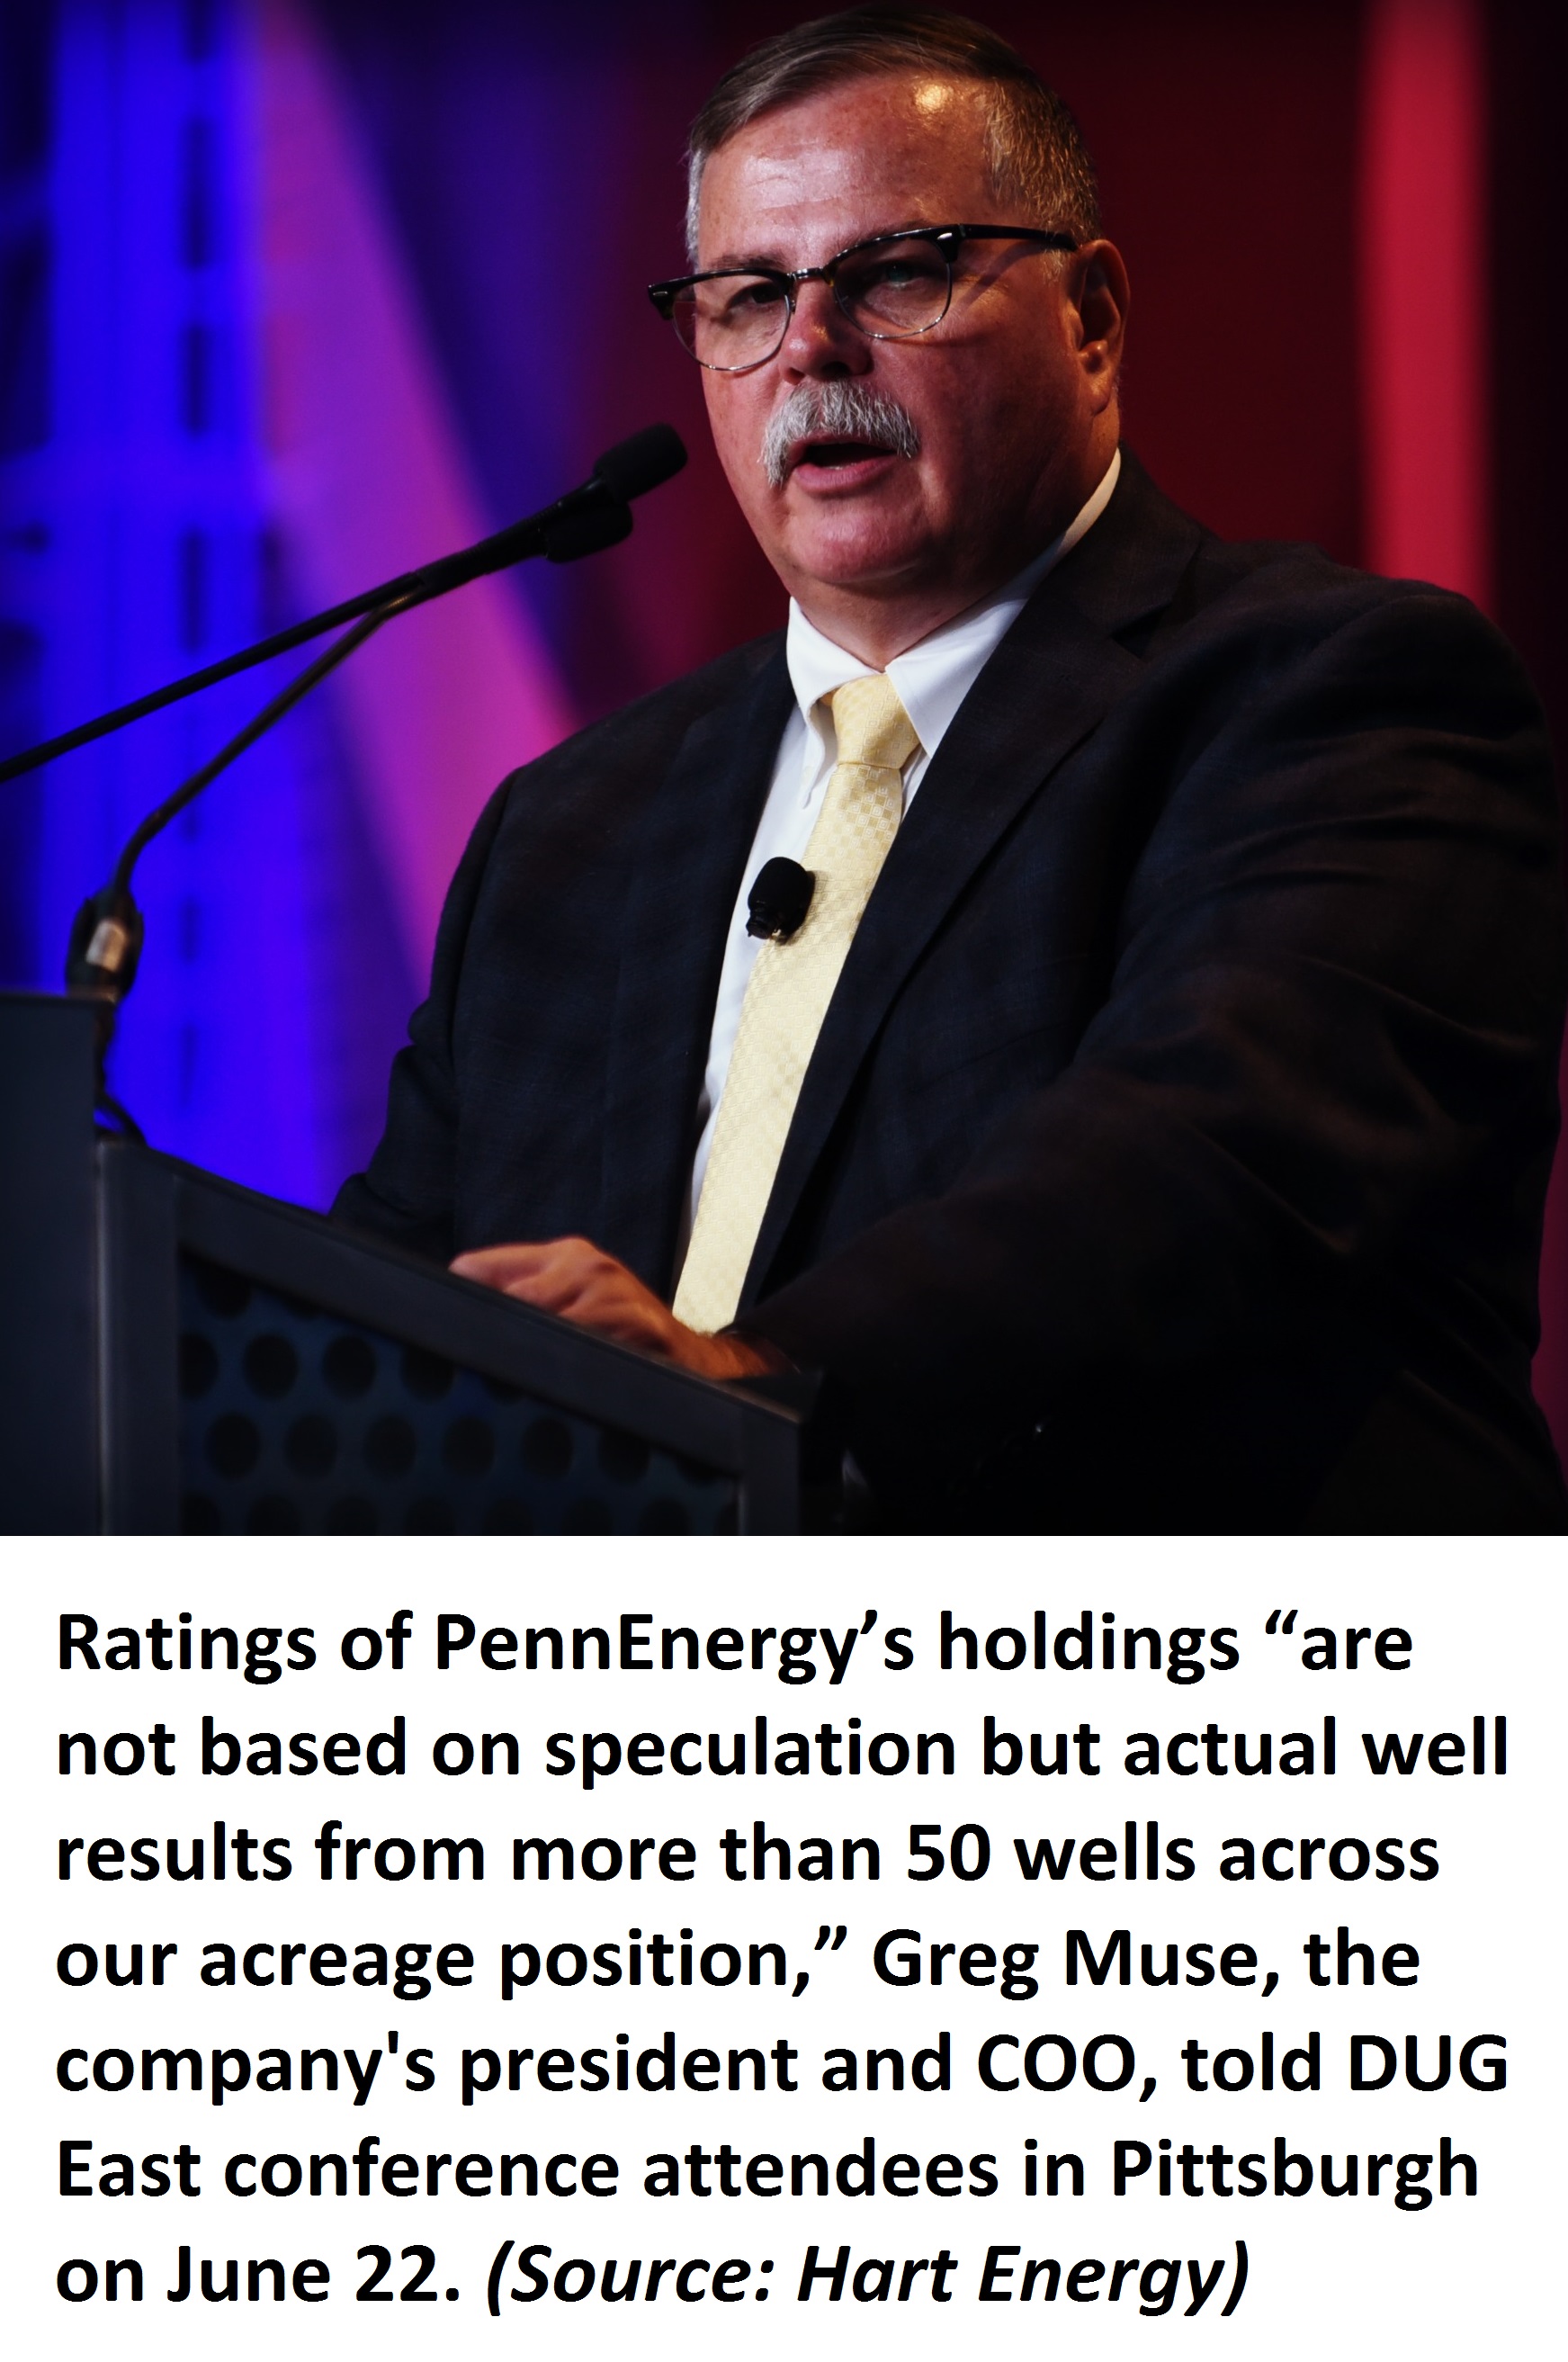 PennEnergy Resources' President and CEO Greg Muse at Hart Energy's DUG East conference in Pittsburgh on June 22.